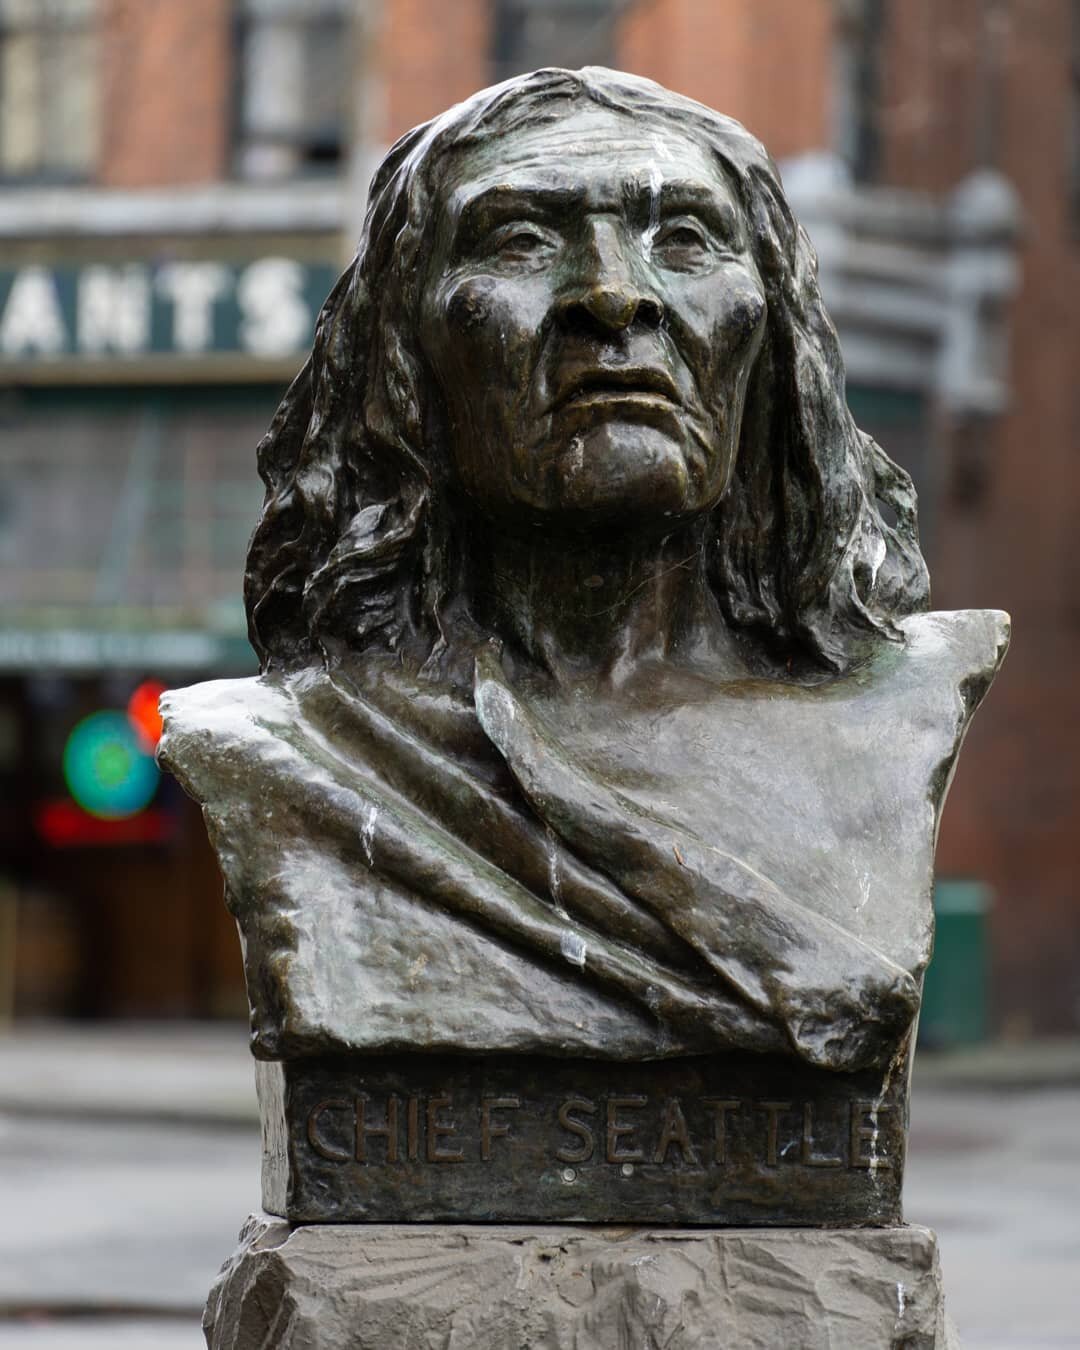 Chief Seattle, a strong native American that gave this gorgeous city its name by eg. being the mediator between first nations and conquerors. His statue is positioned on the pioneer square together with some wordings he used as well as a totem pole a